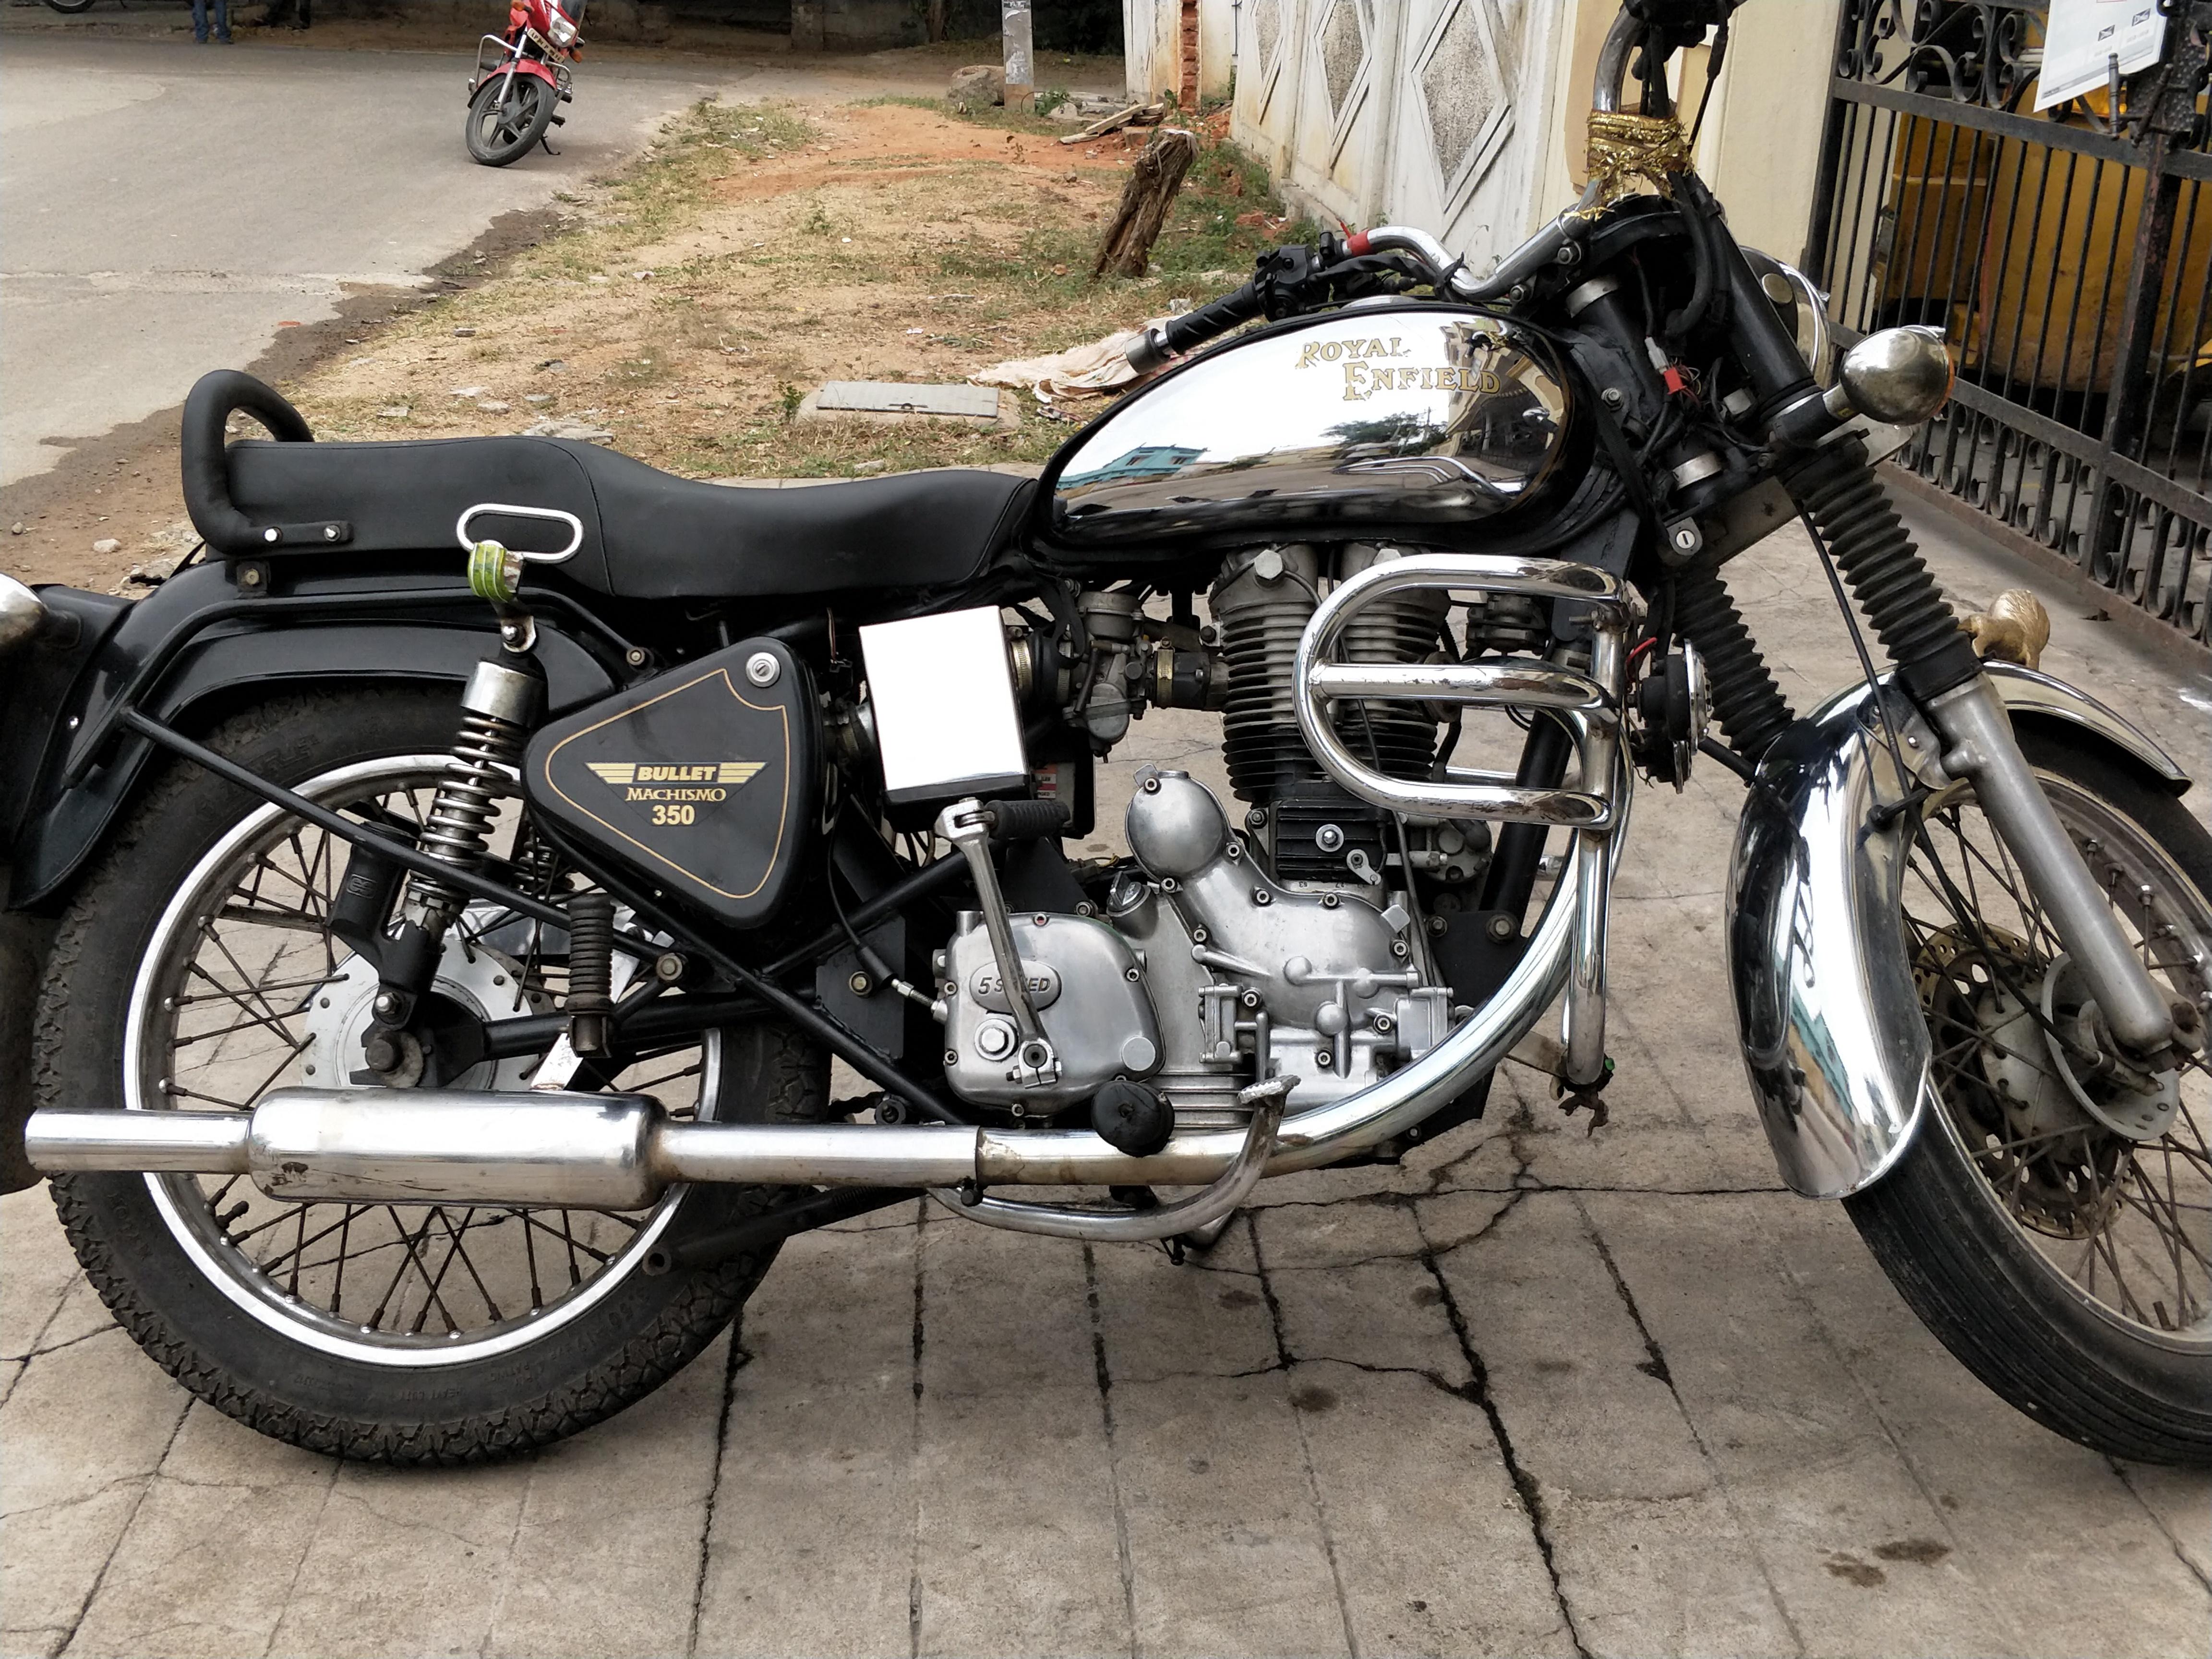 What are the best Royal Enfield budgeted bikes?